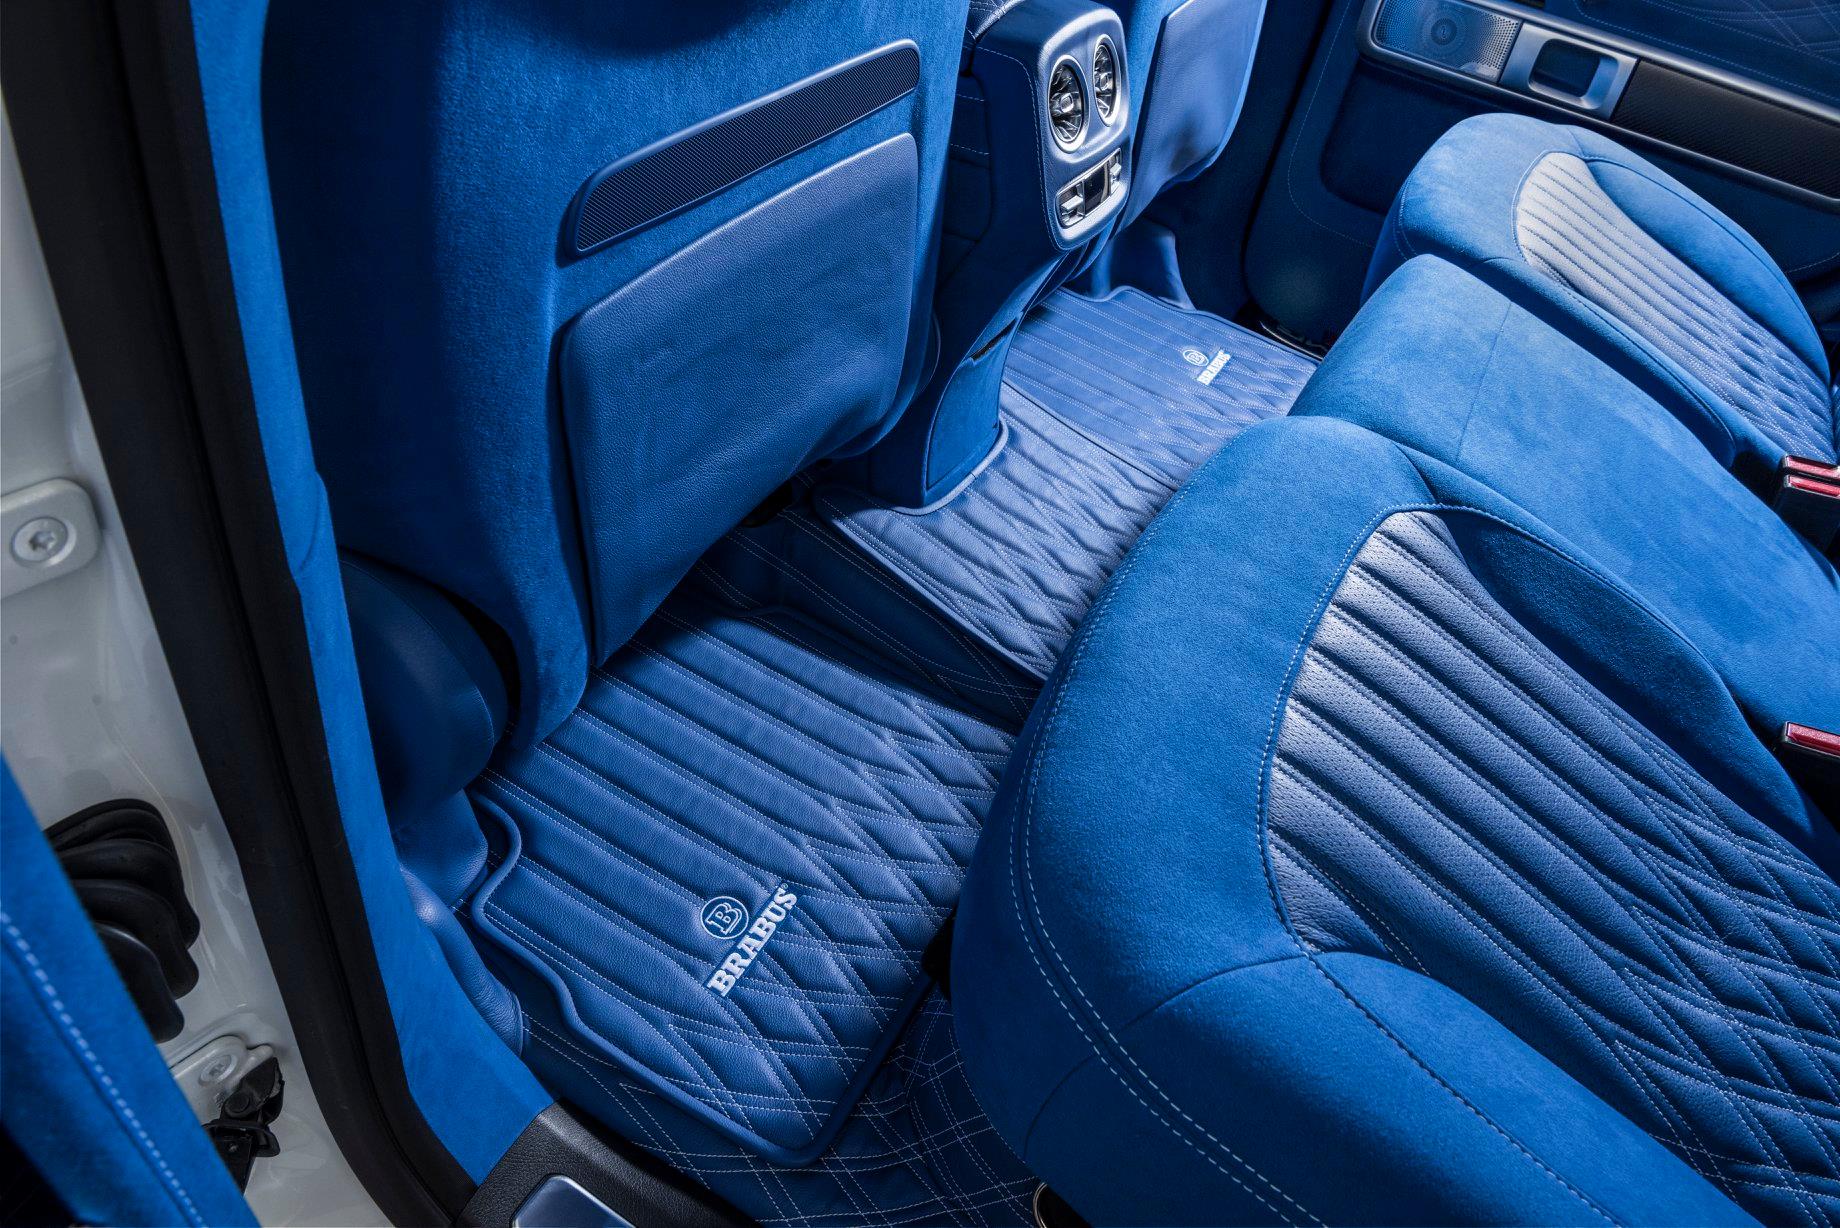 2019 Mercedes Amg G63 Looks Amazing In Brabus Blue Leather